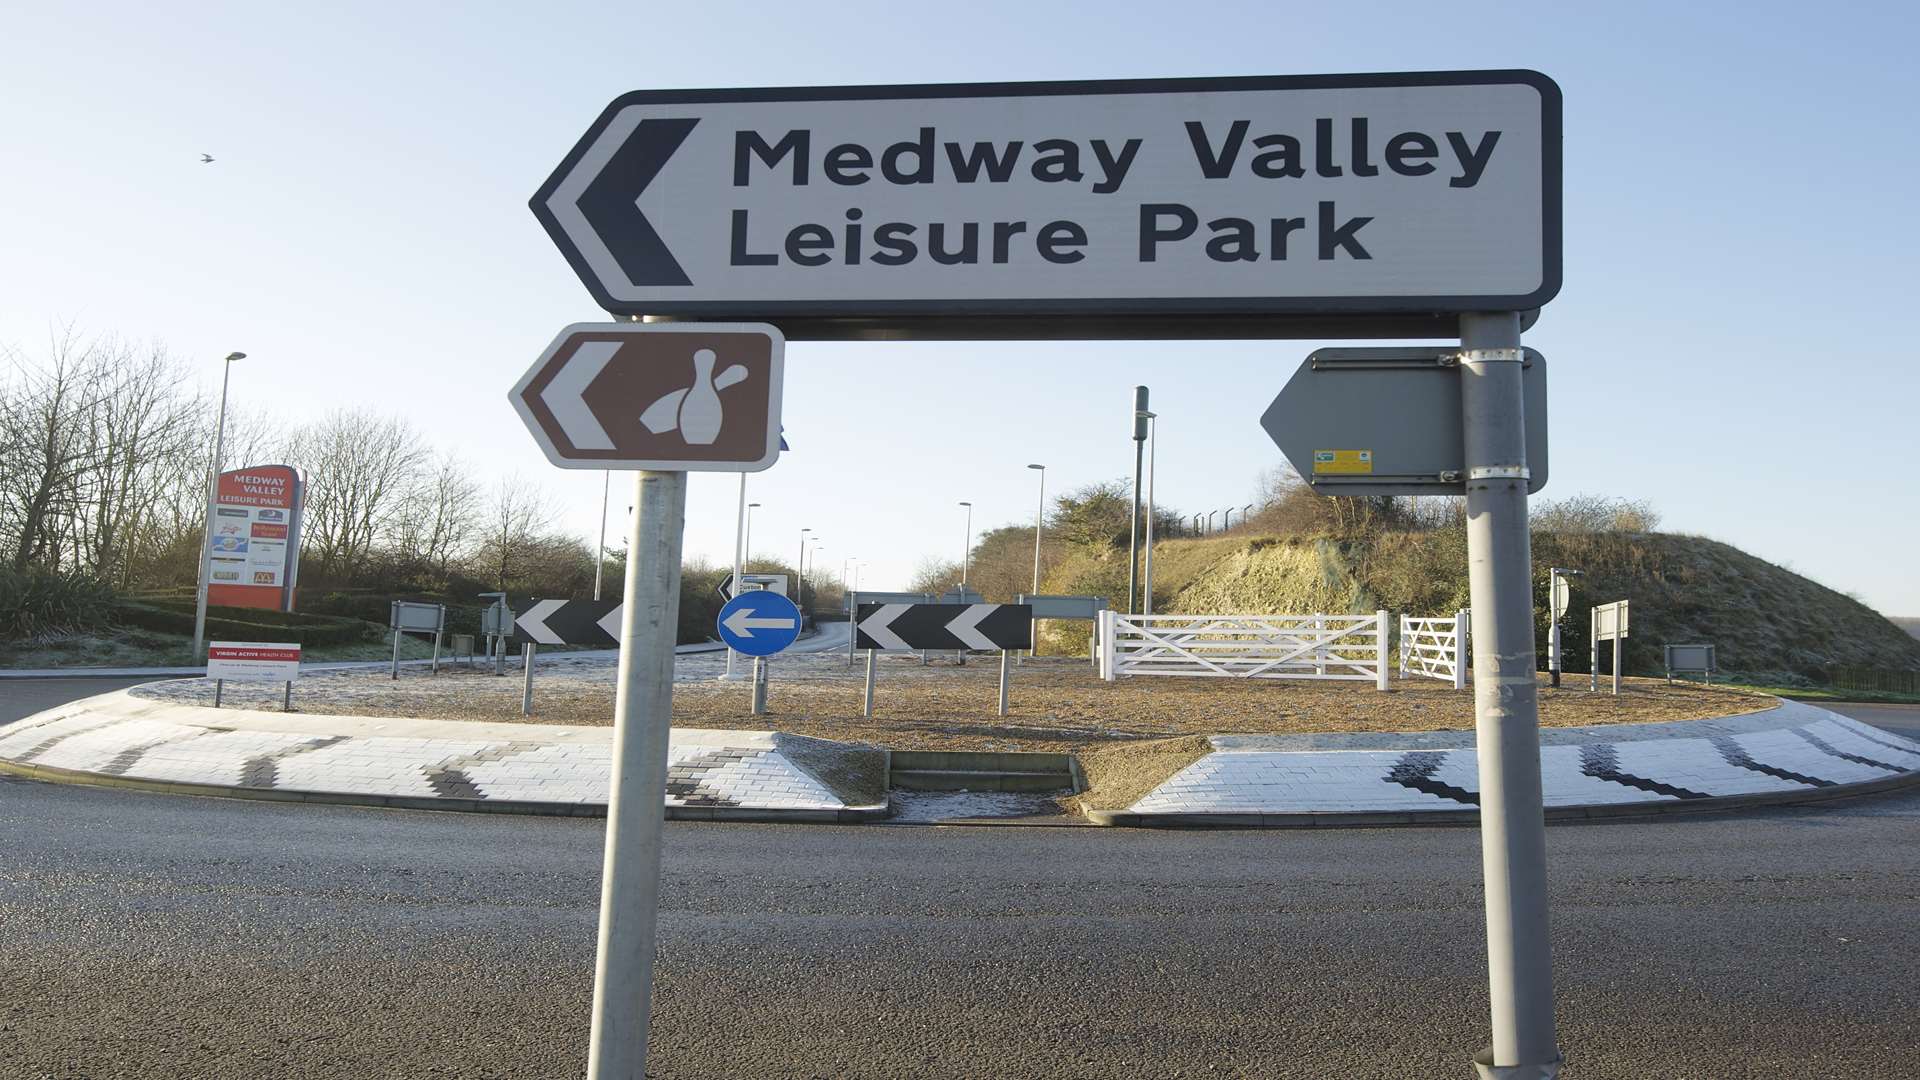 The Medway Valley Leisure Park roundabout in Strood